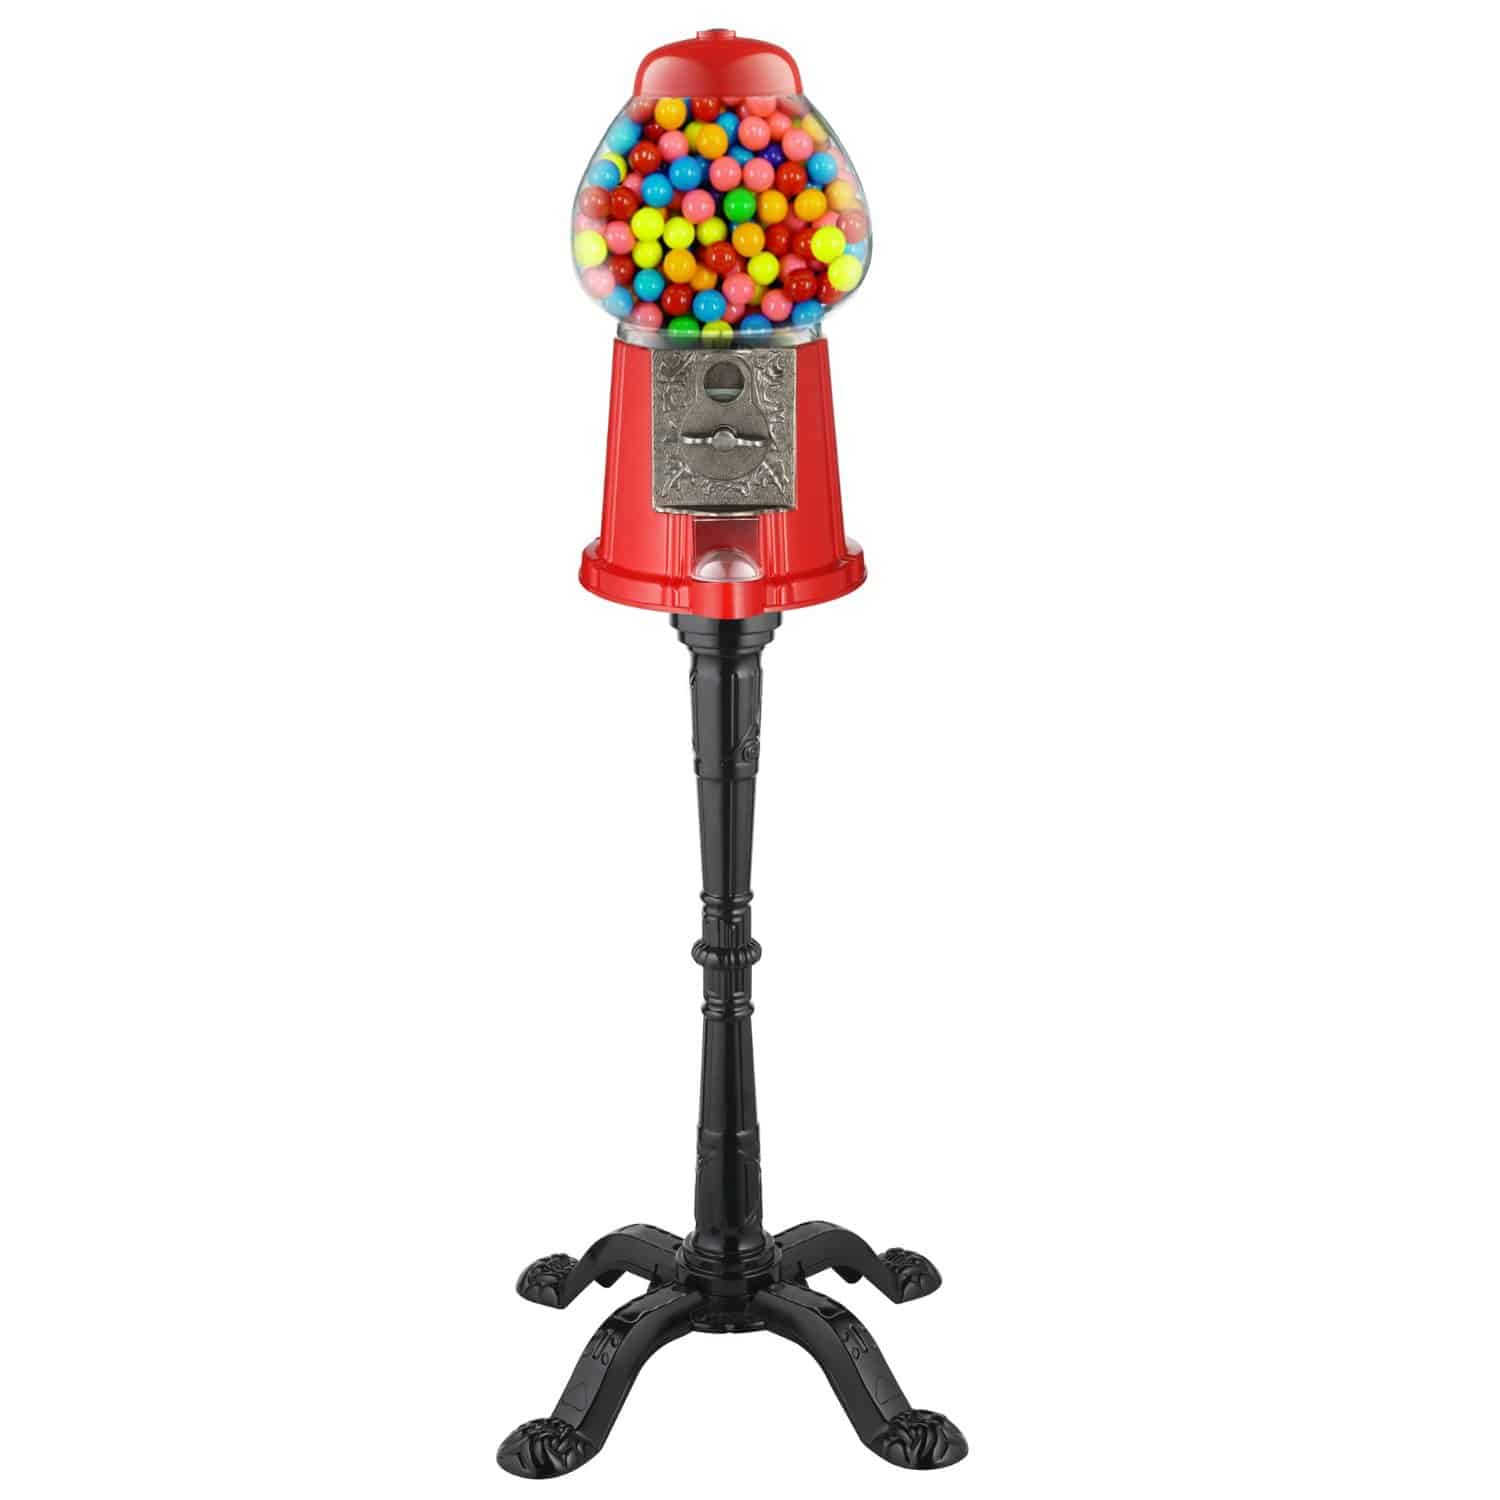 Classic Gumball Machine on a stand